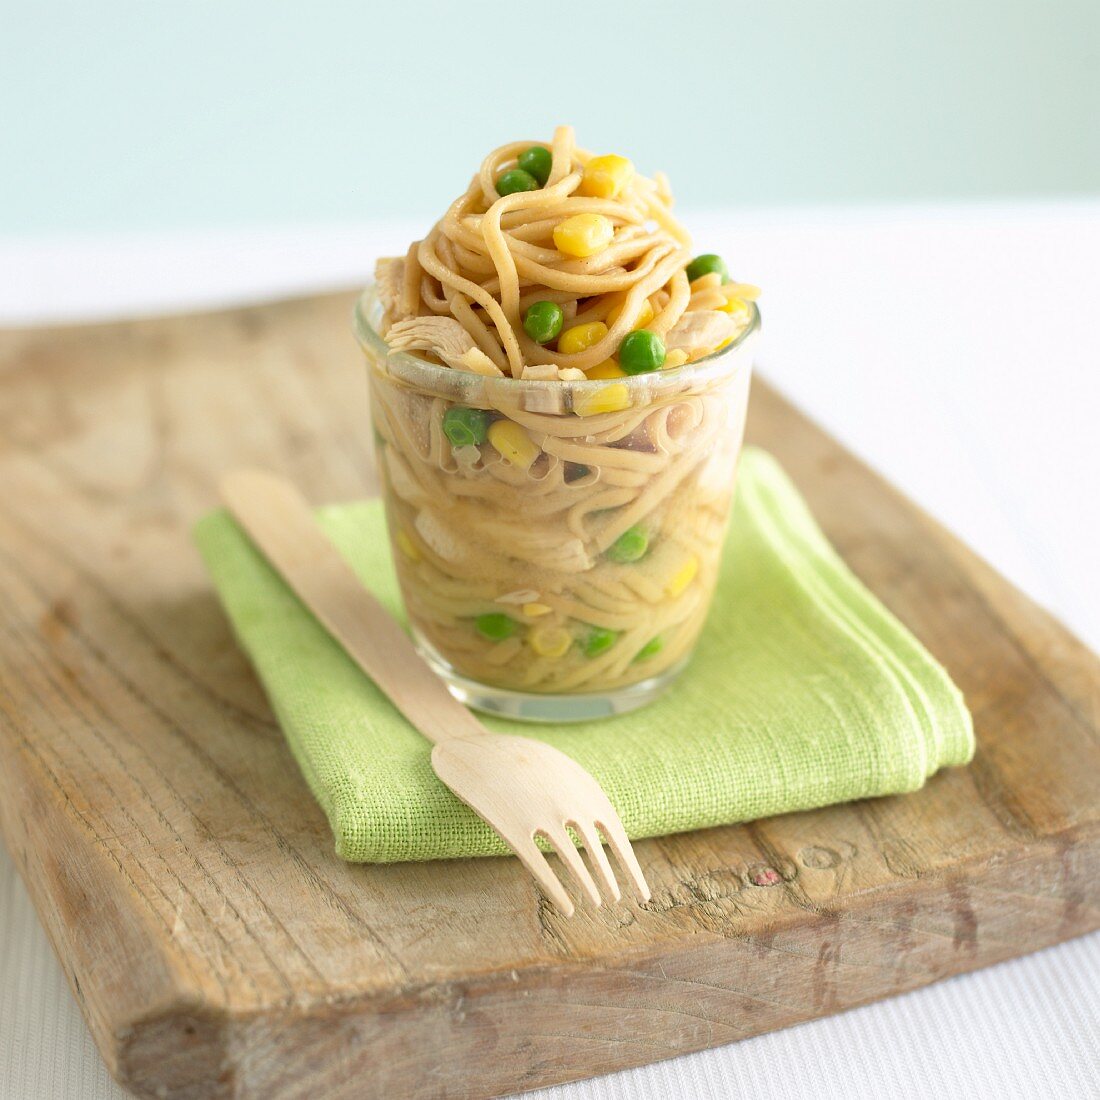 Pasta salad with chicken, sweetcorn and peas